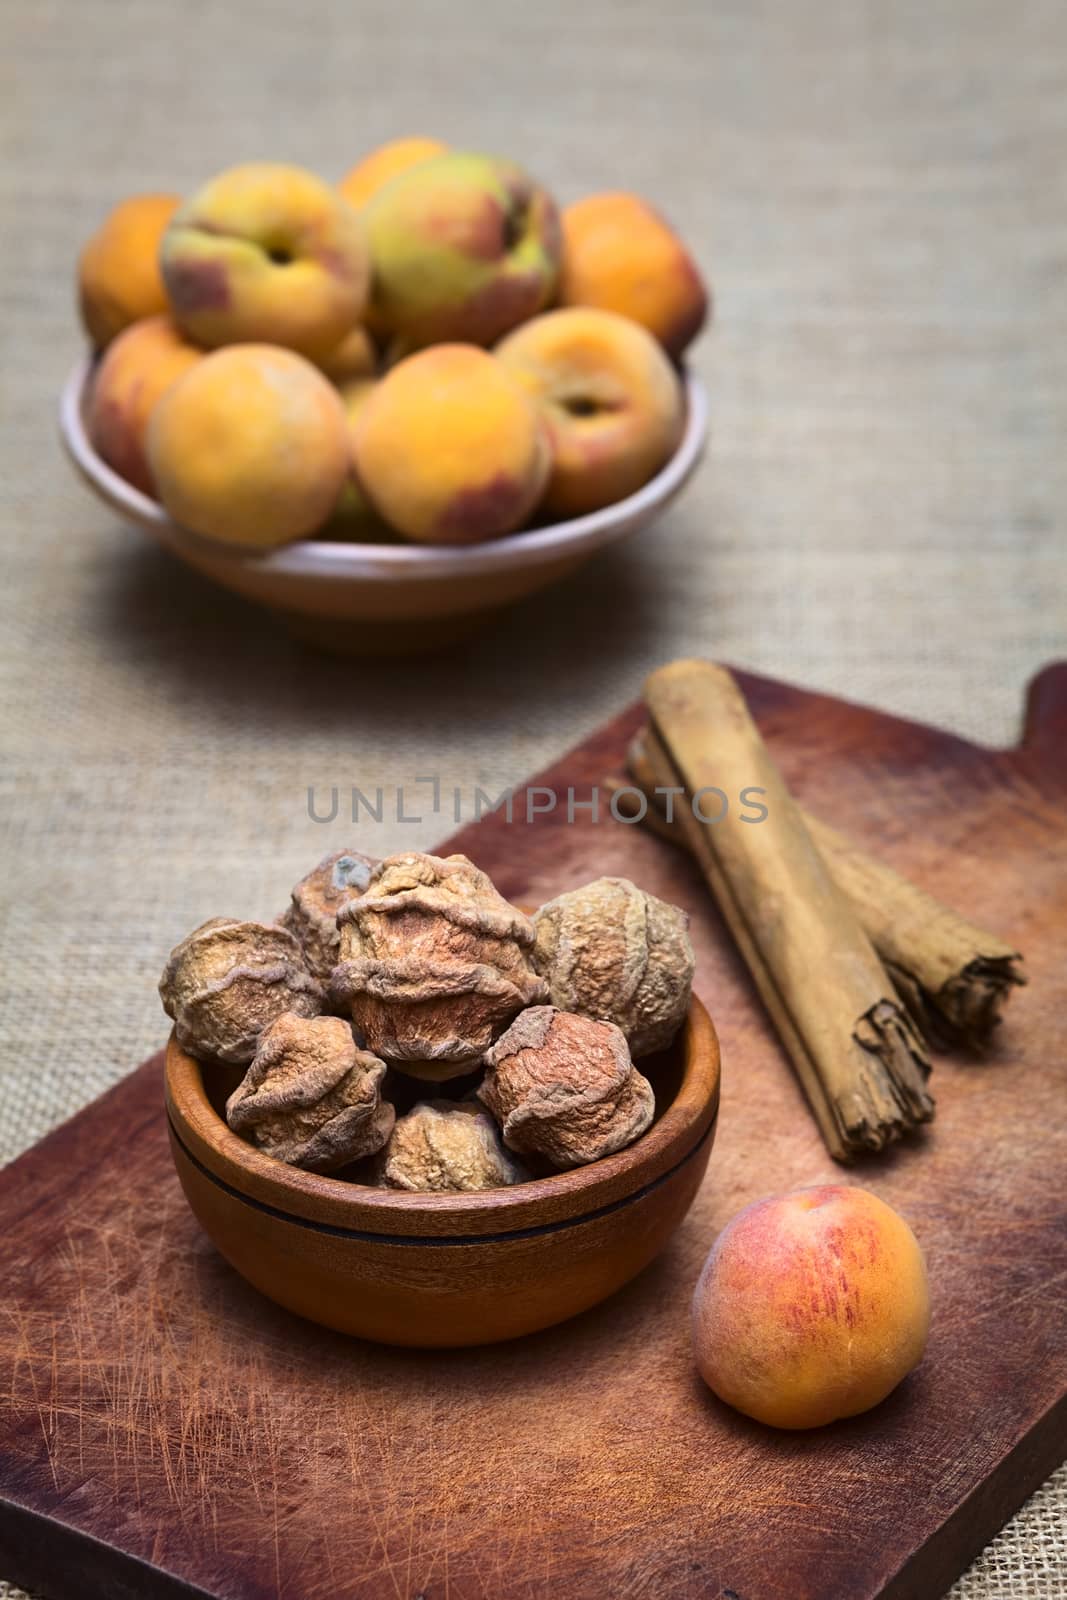 Dried peeled peach called quisa (also kisa, mocochinchi) from which a beverage is prepared with sugar and cinnamon in Bolivia. The drink is very popular and sold on the streets in Bolivia (Photographed with natural light) (Selective Focus, Focus on the front peaches)
 